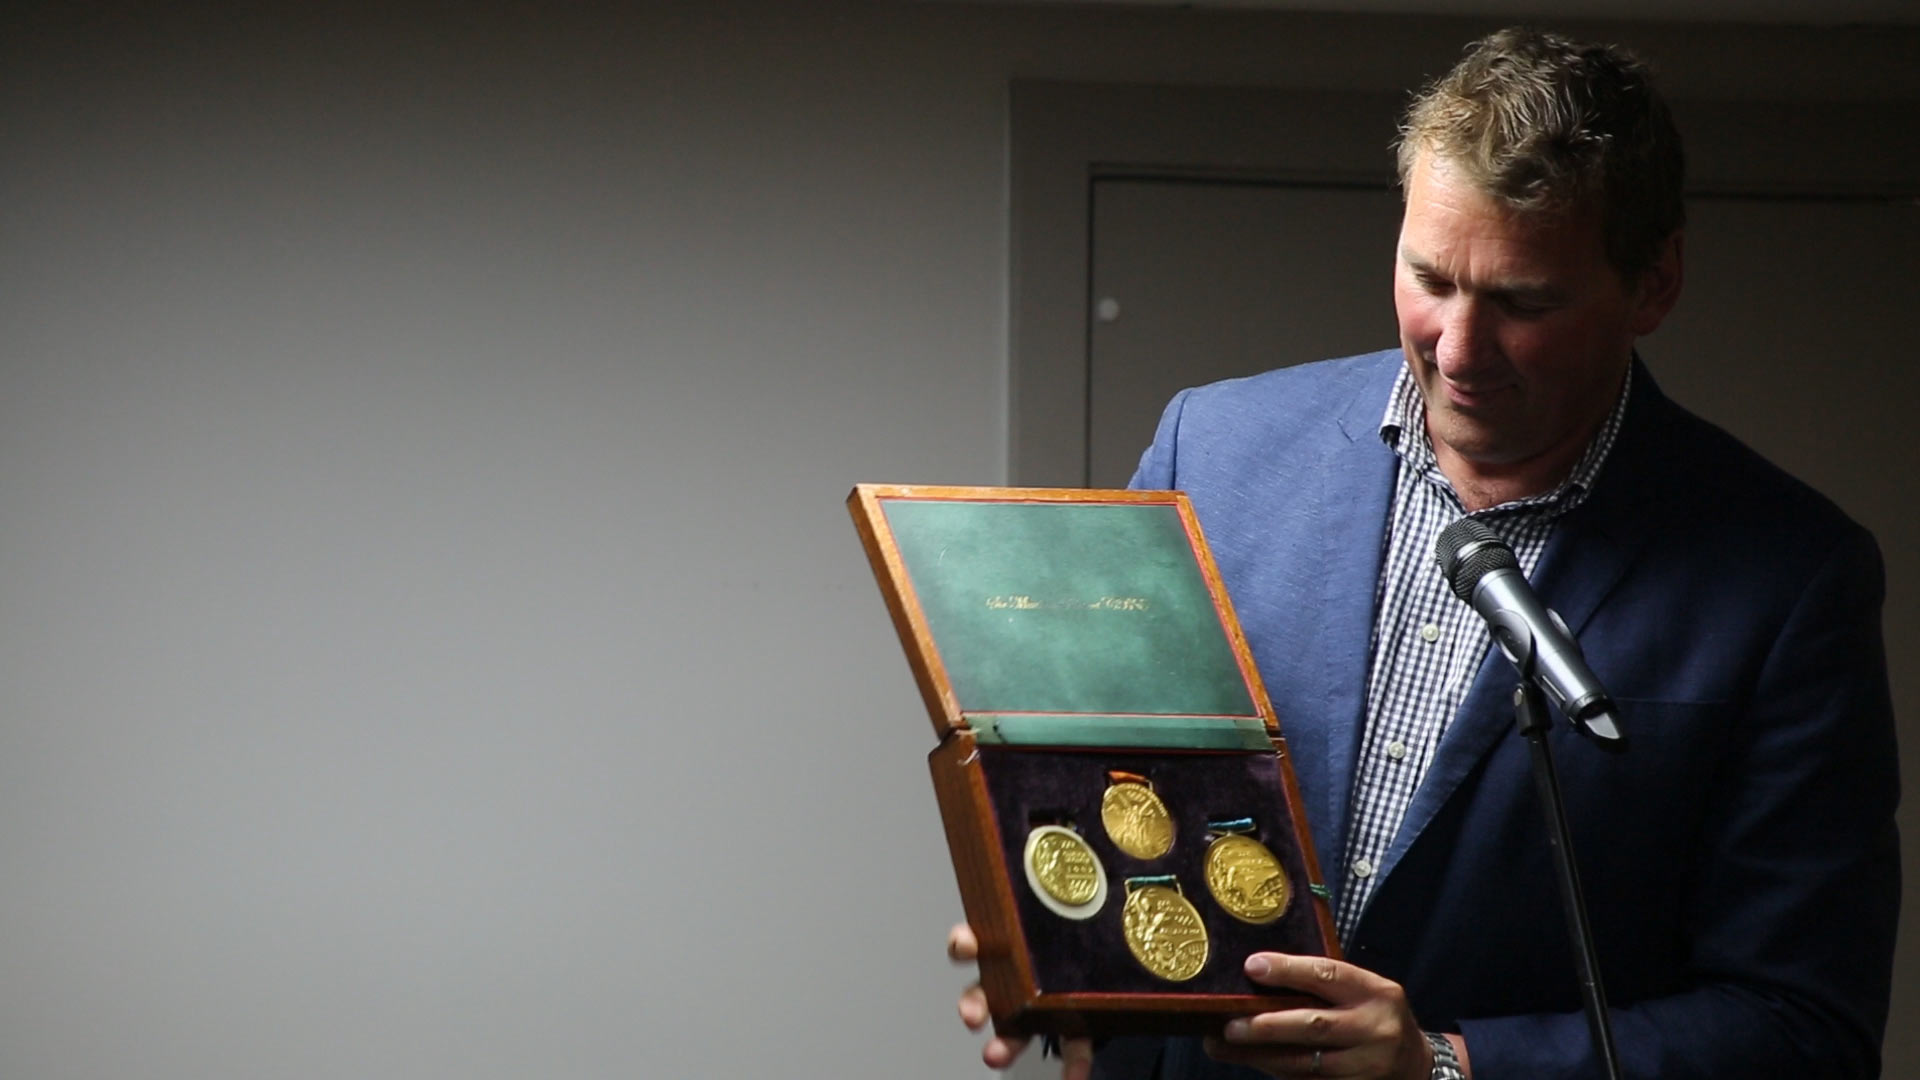 Sir-Matthew-Pinsent-shows-off-his-4-Olympic-medals